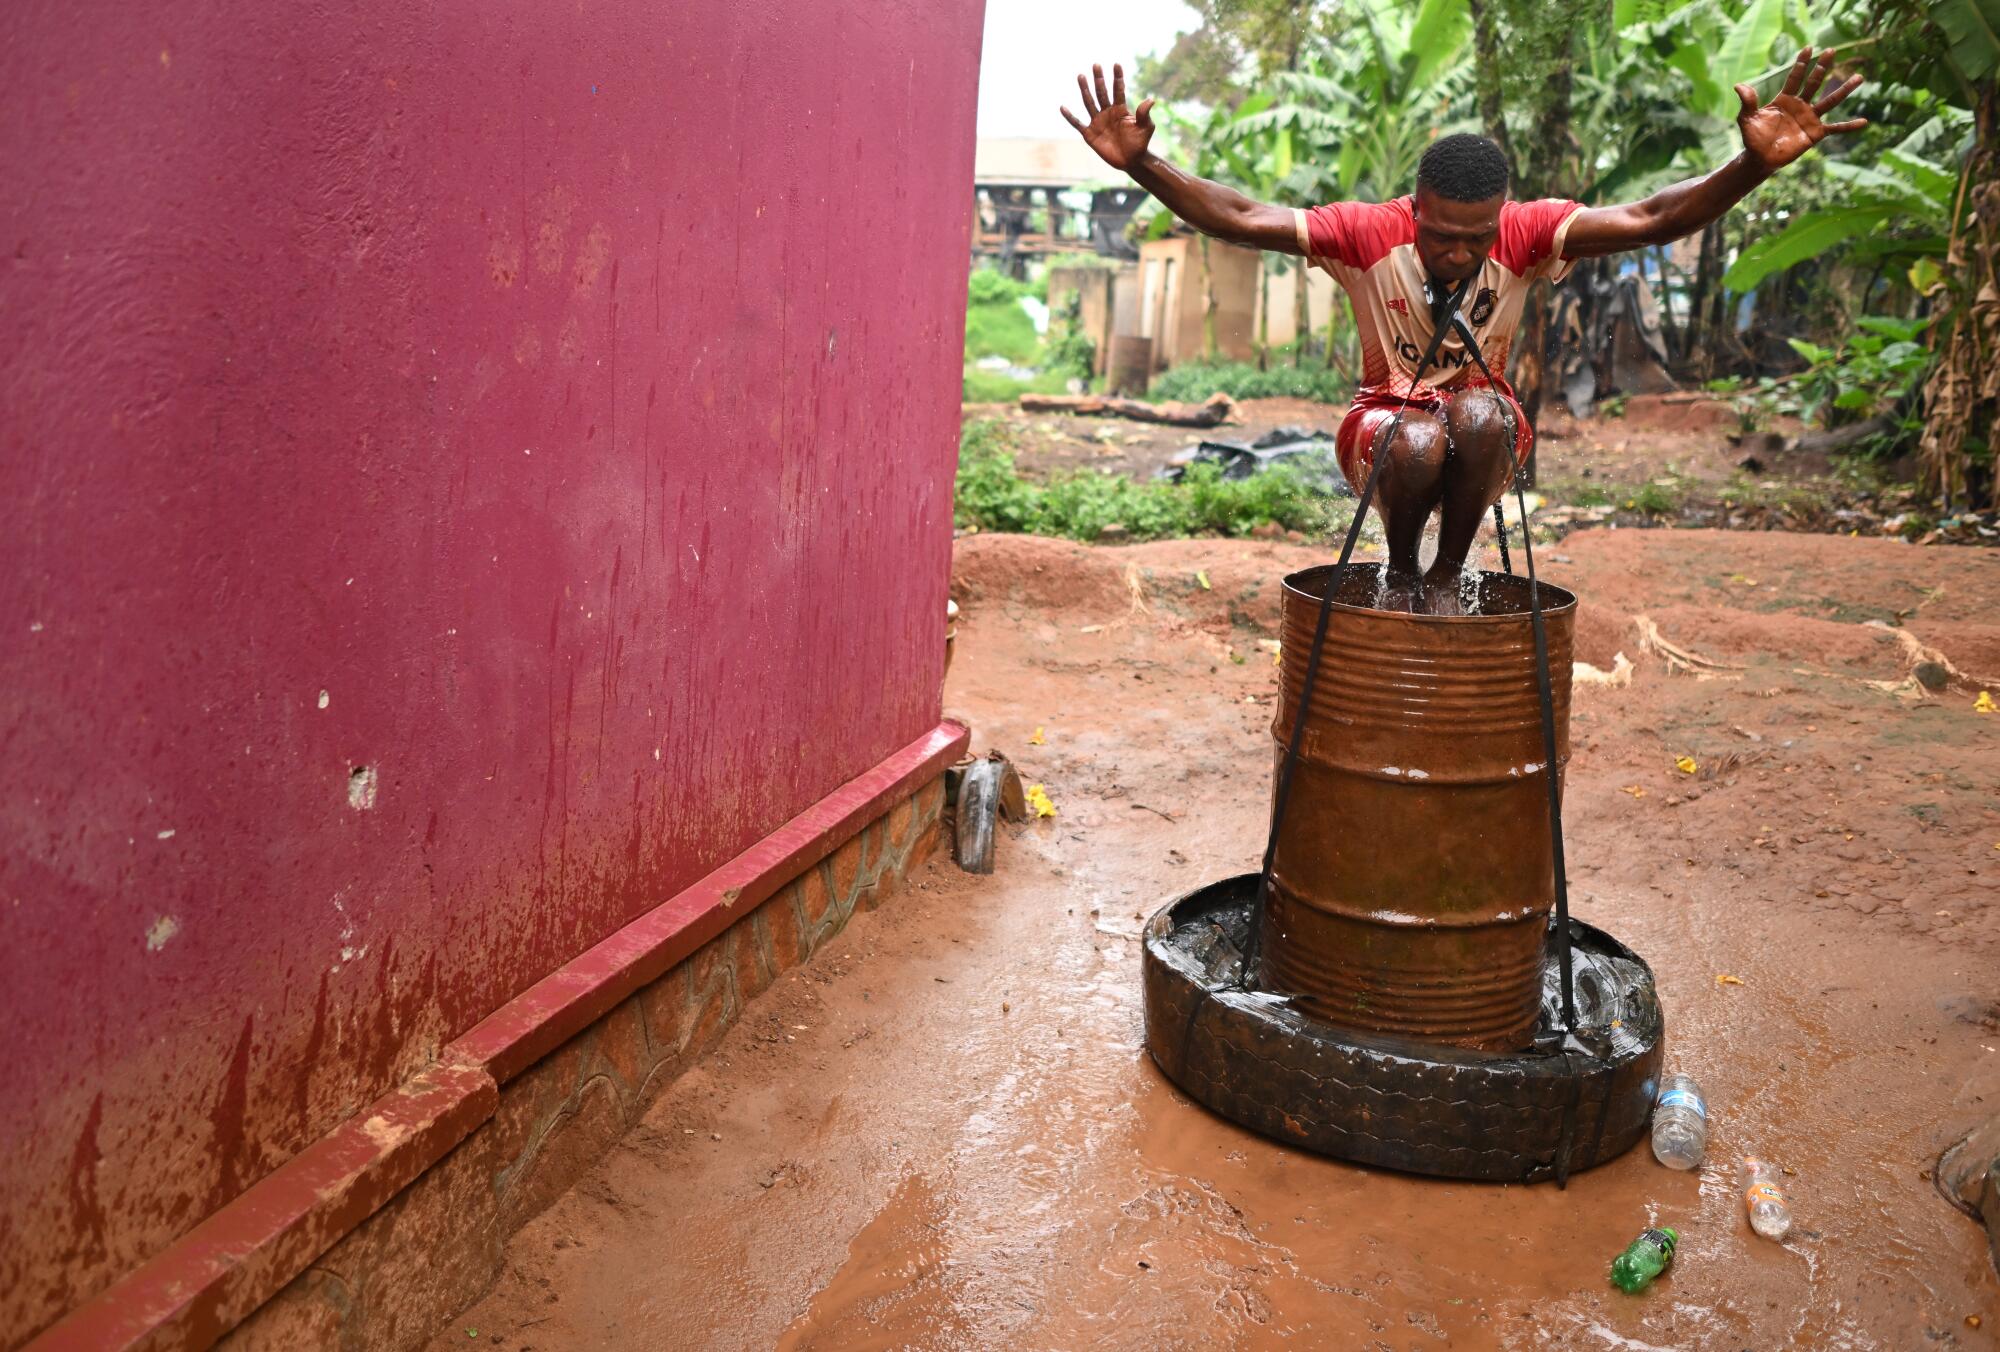 Dennis Kasumba jumps inside a drum filled with water to strengthen his legs outside his home in Uganda.